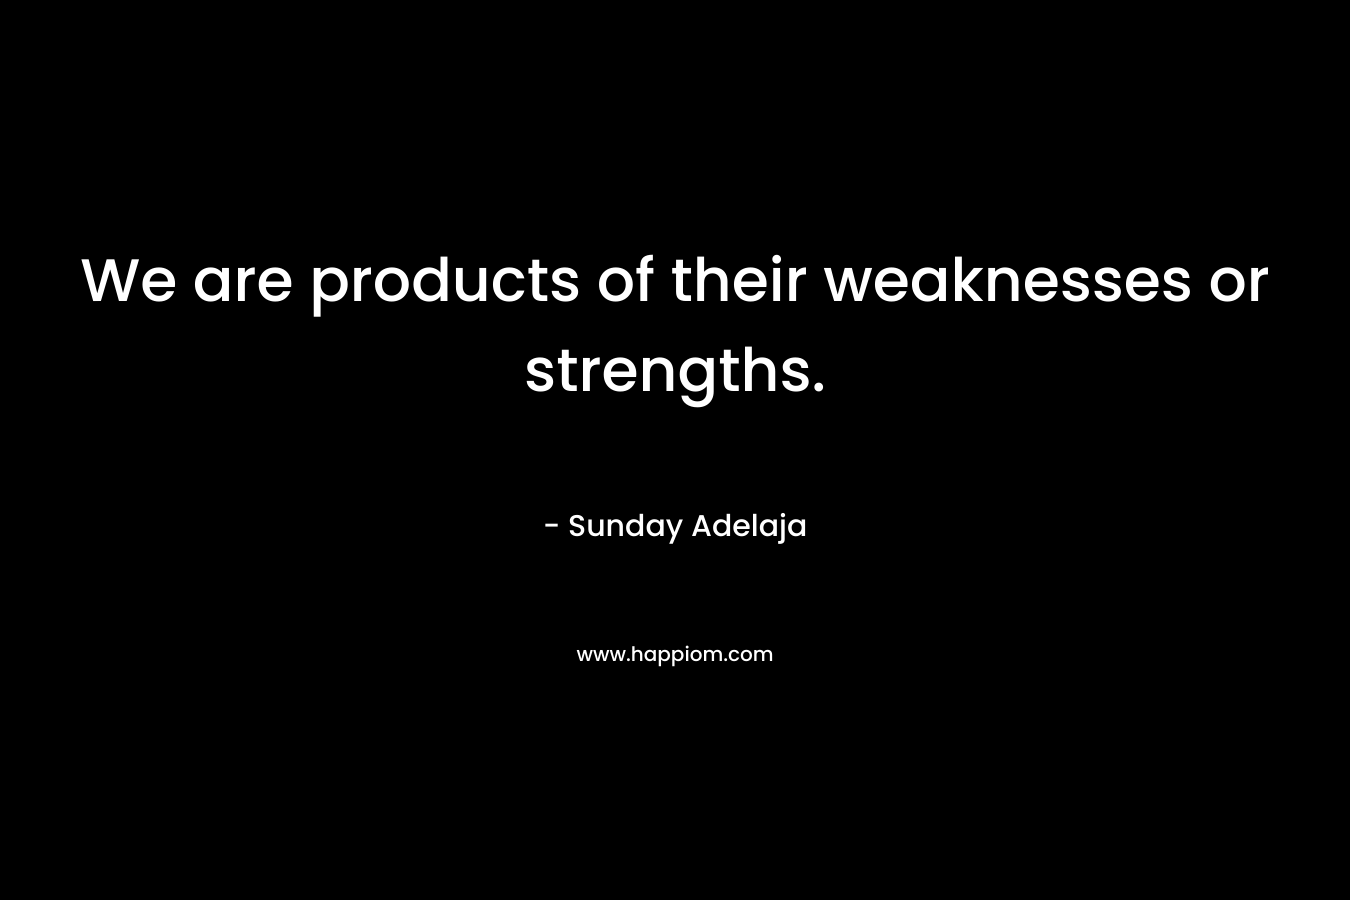 We are products of their weaknesses or strengths.